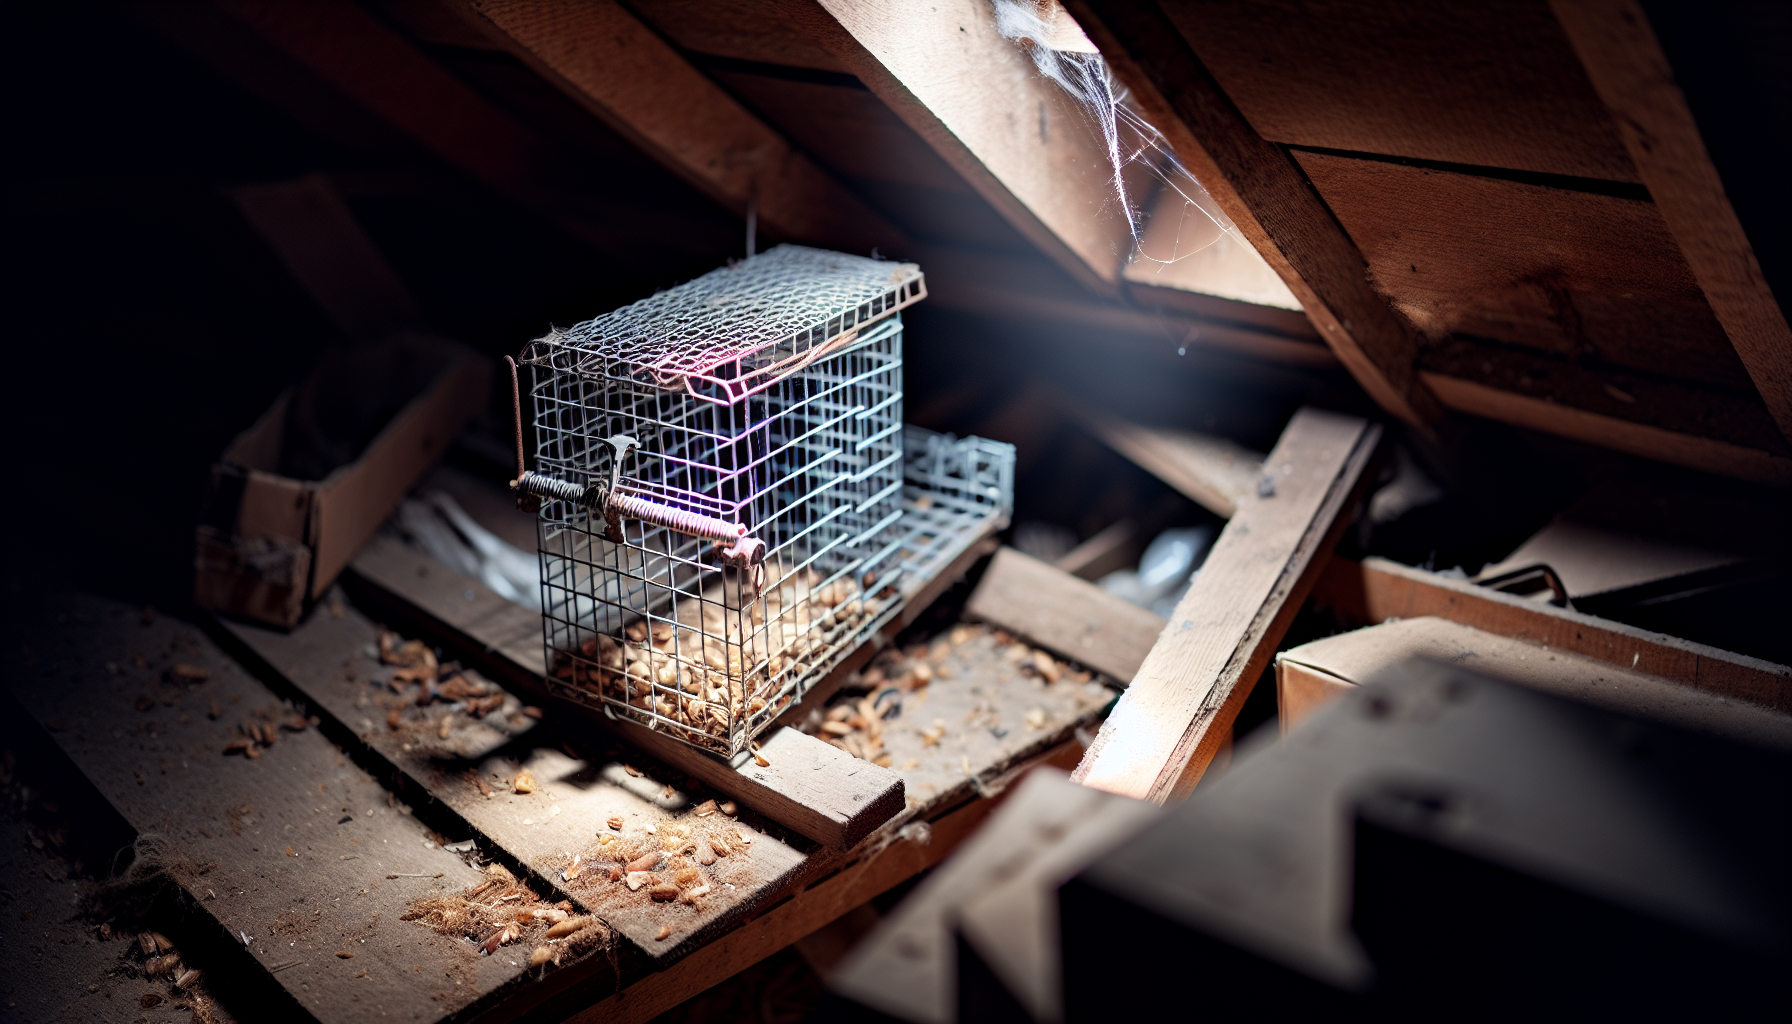 Setting up a squirrel trap in the attic